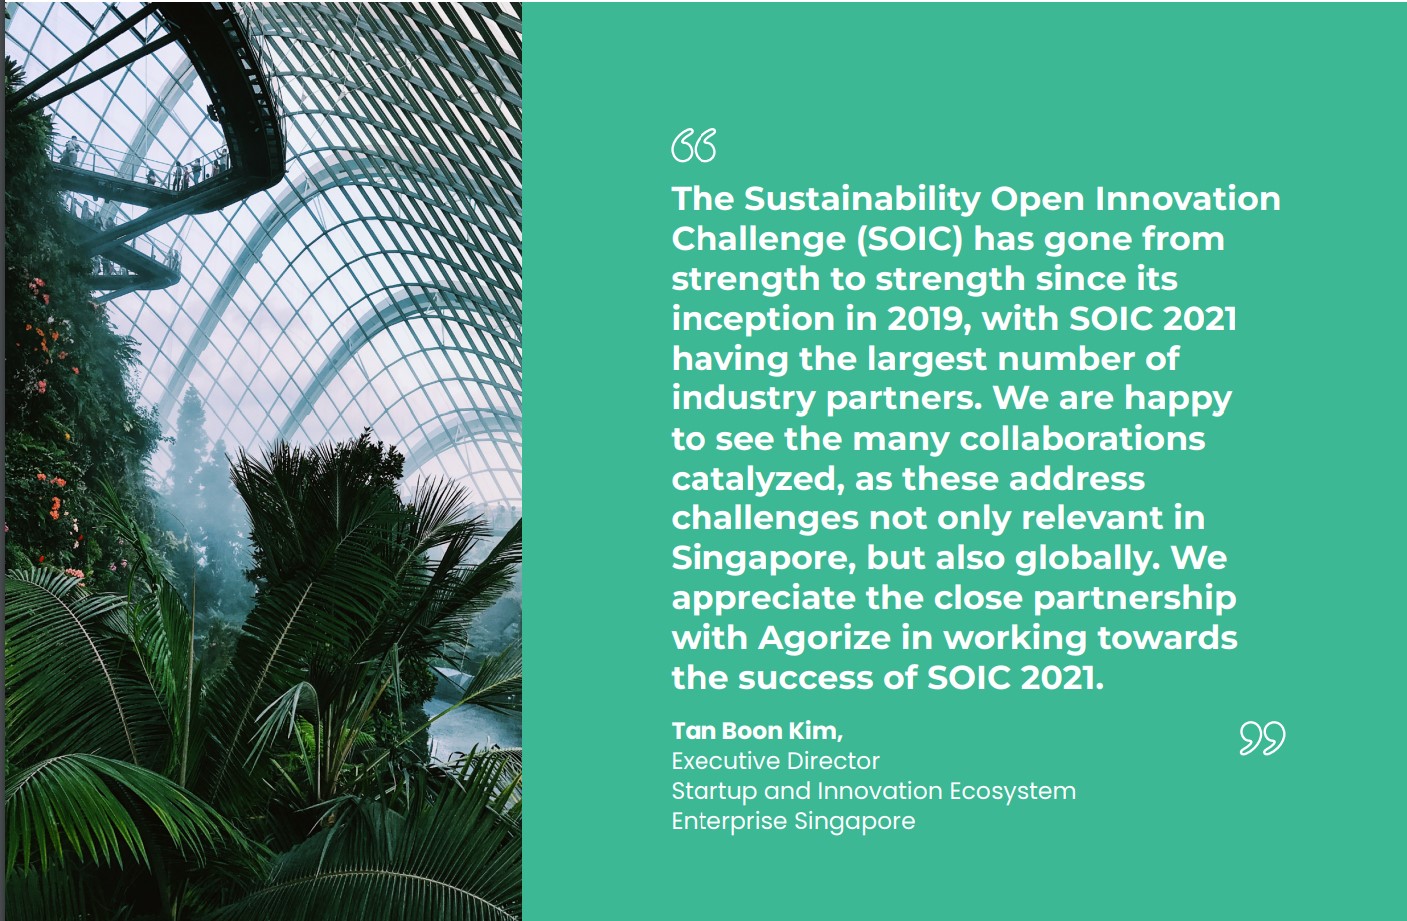 Accelerate Innovation to Build a Sustainable Singapore 3